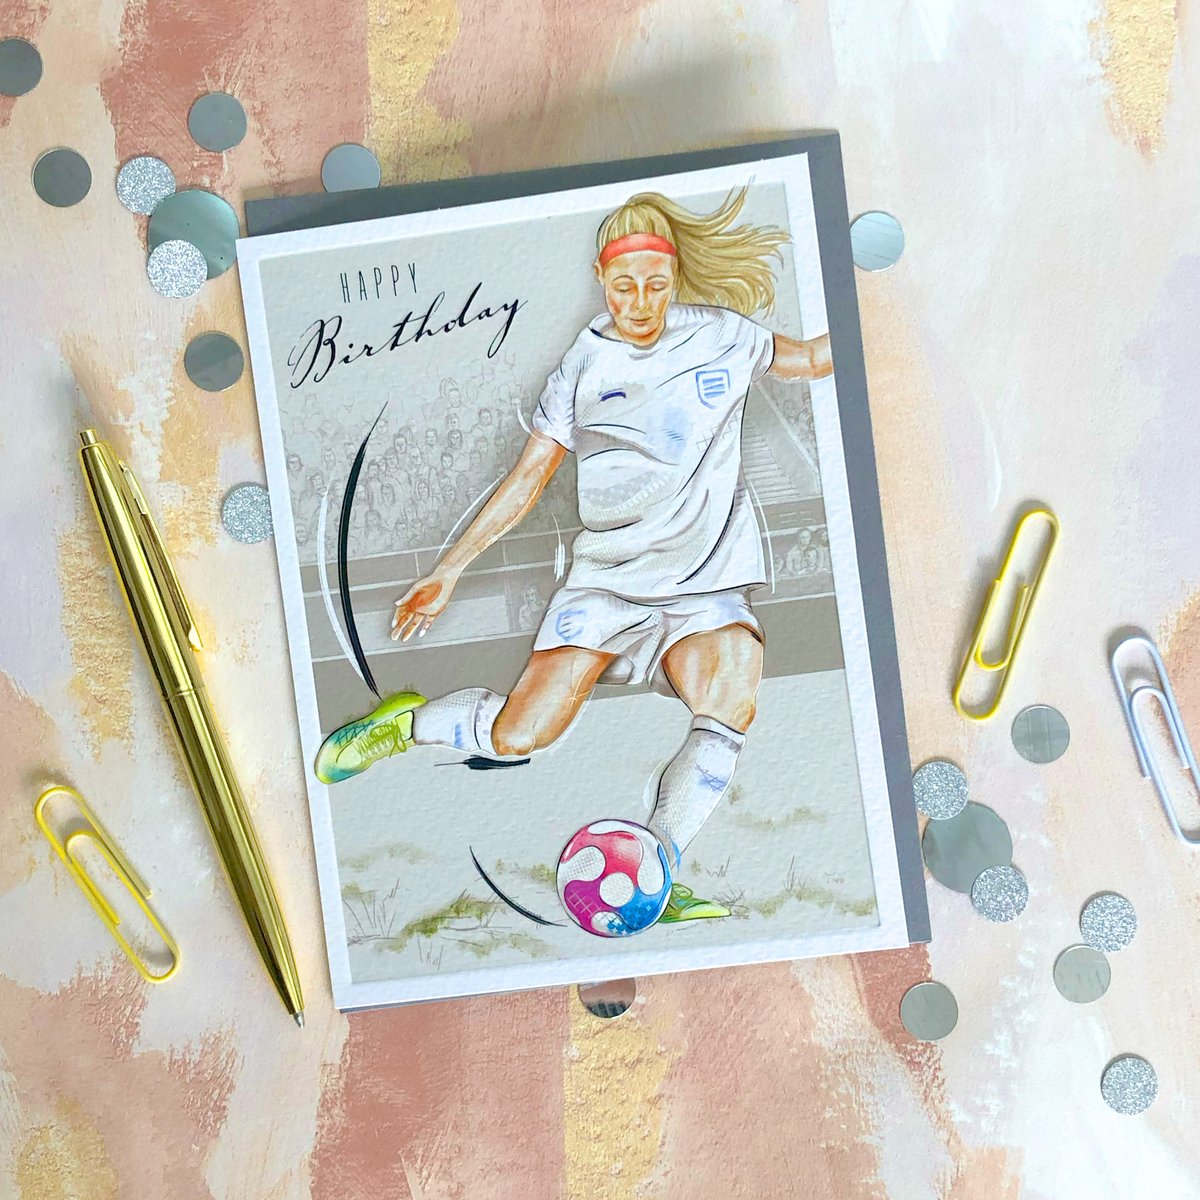 The Lionesses kick off their World Cup campaign today against Denmark! ⚽ #ComeOnEngland #Football #WomensWorldCup #NoelTattGroup #Greetingcards